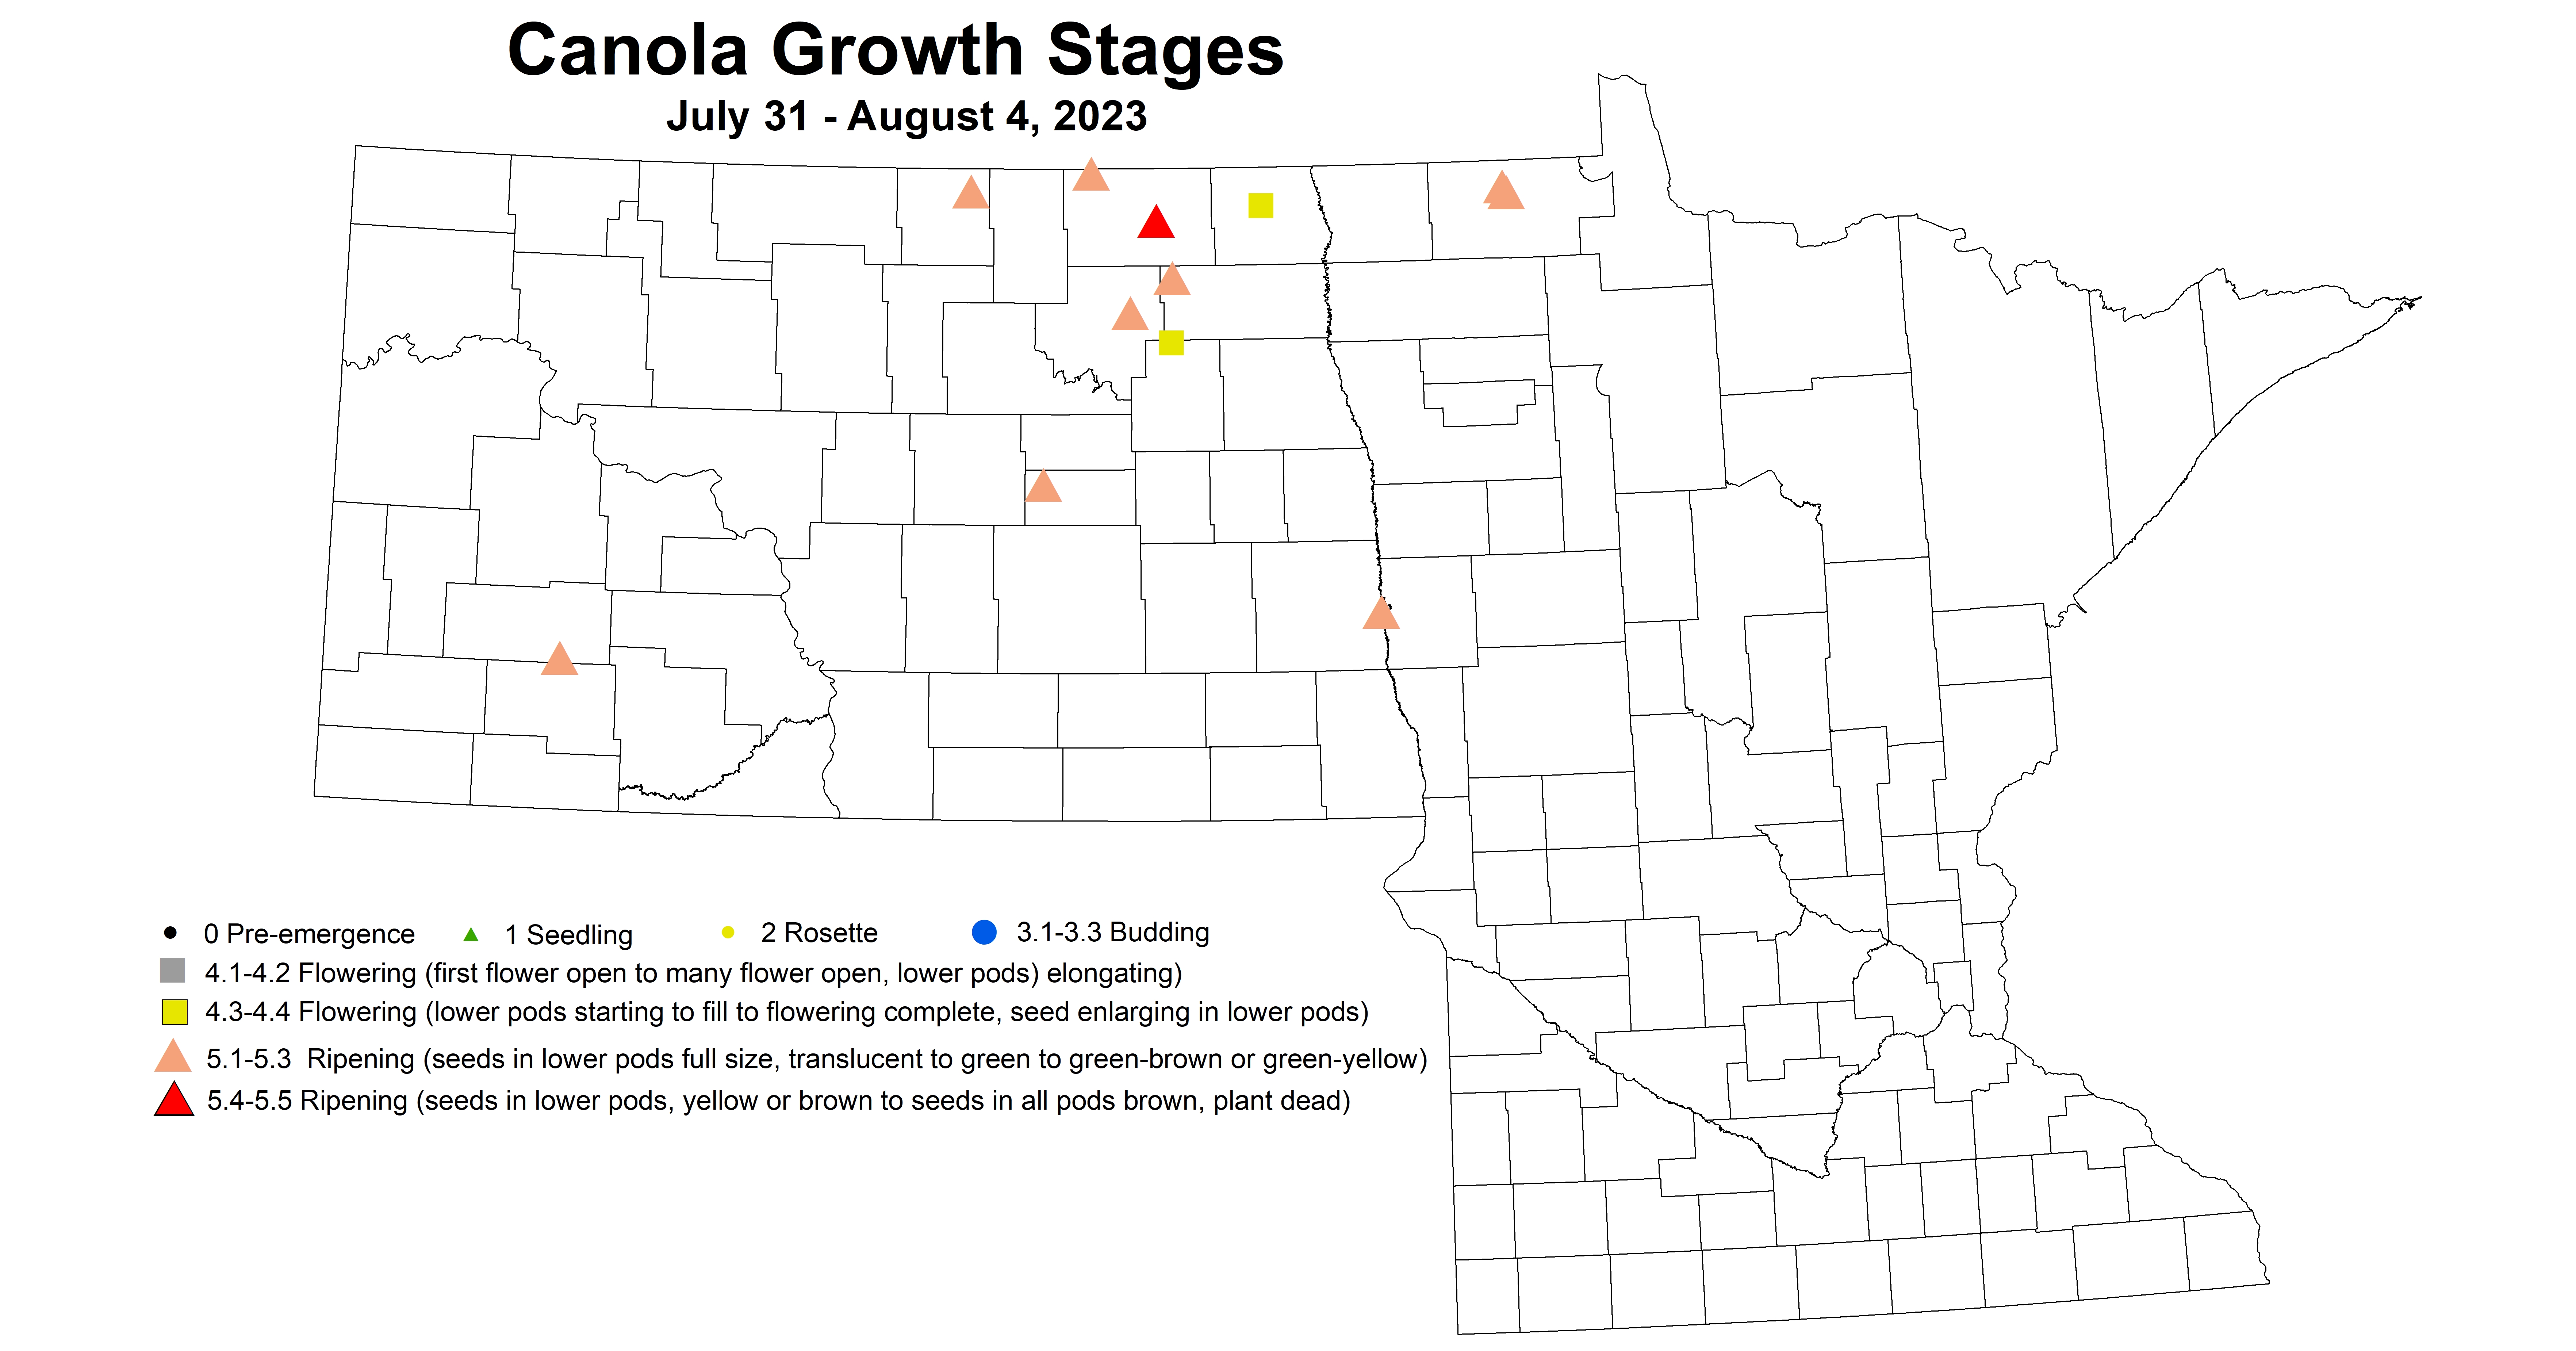 canola growth stages 7.31-8.4 2023